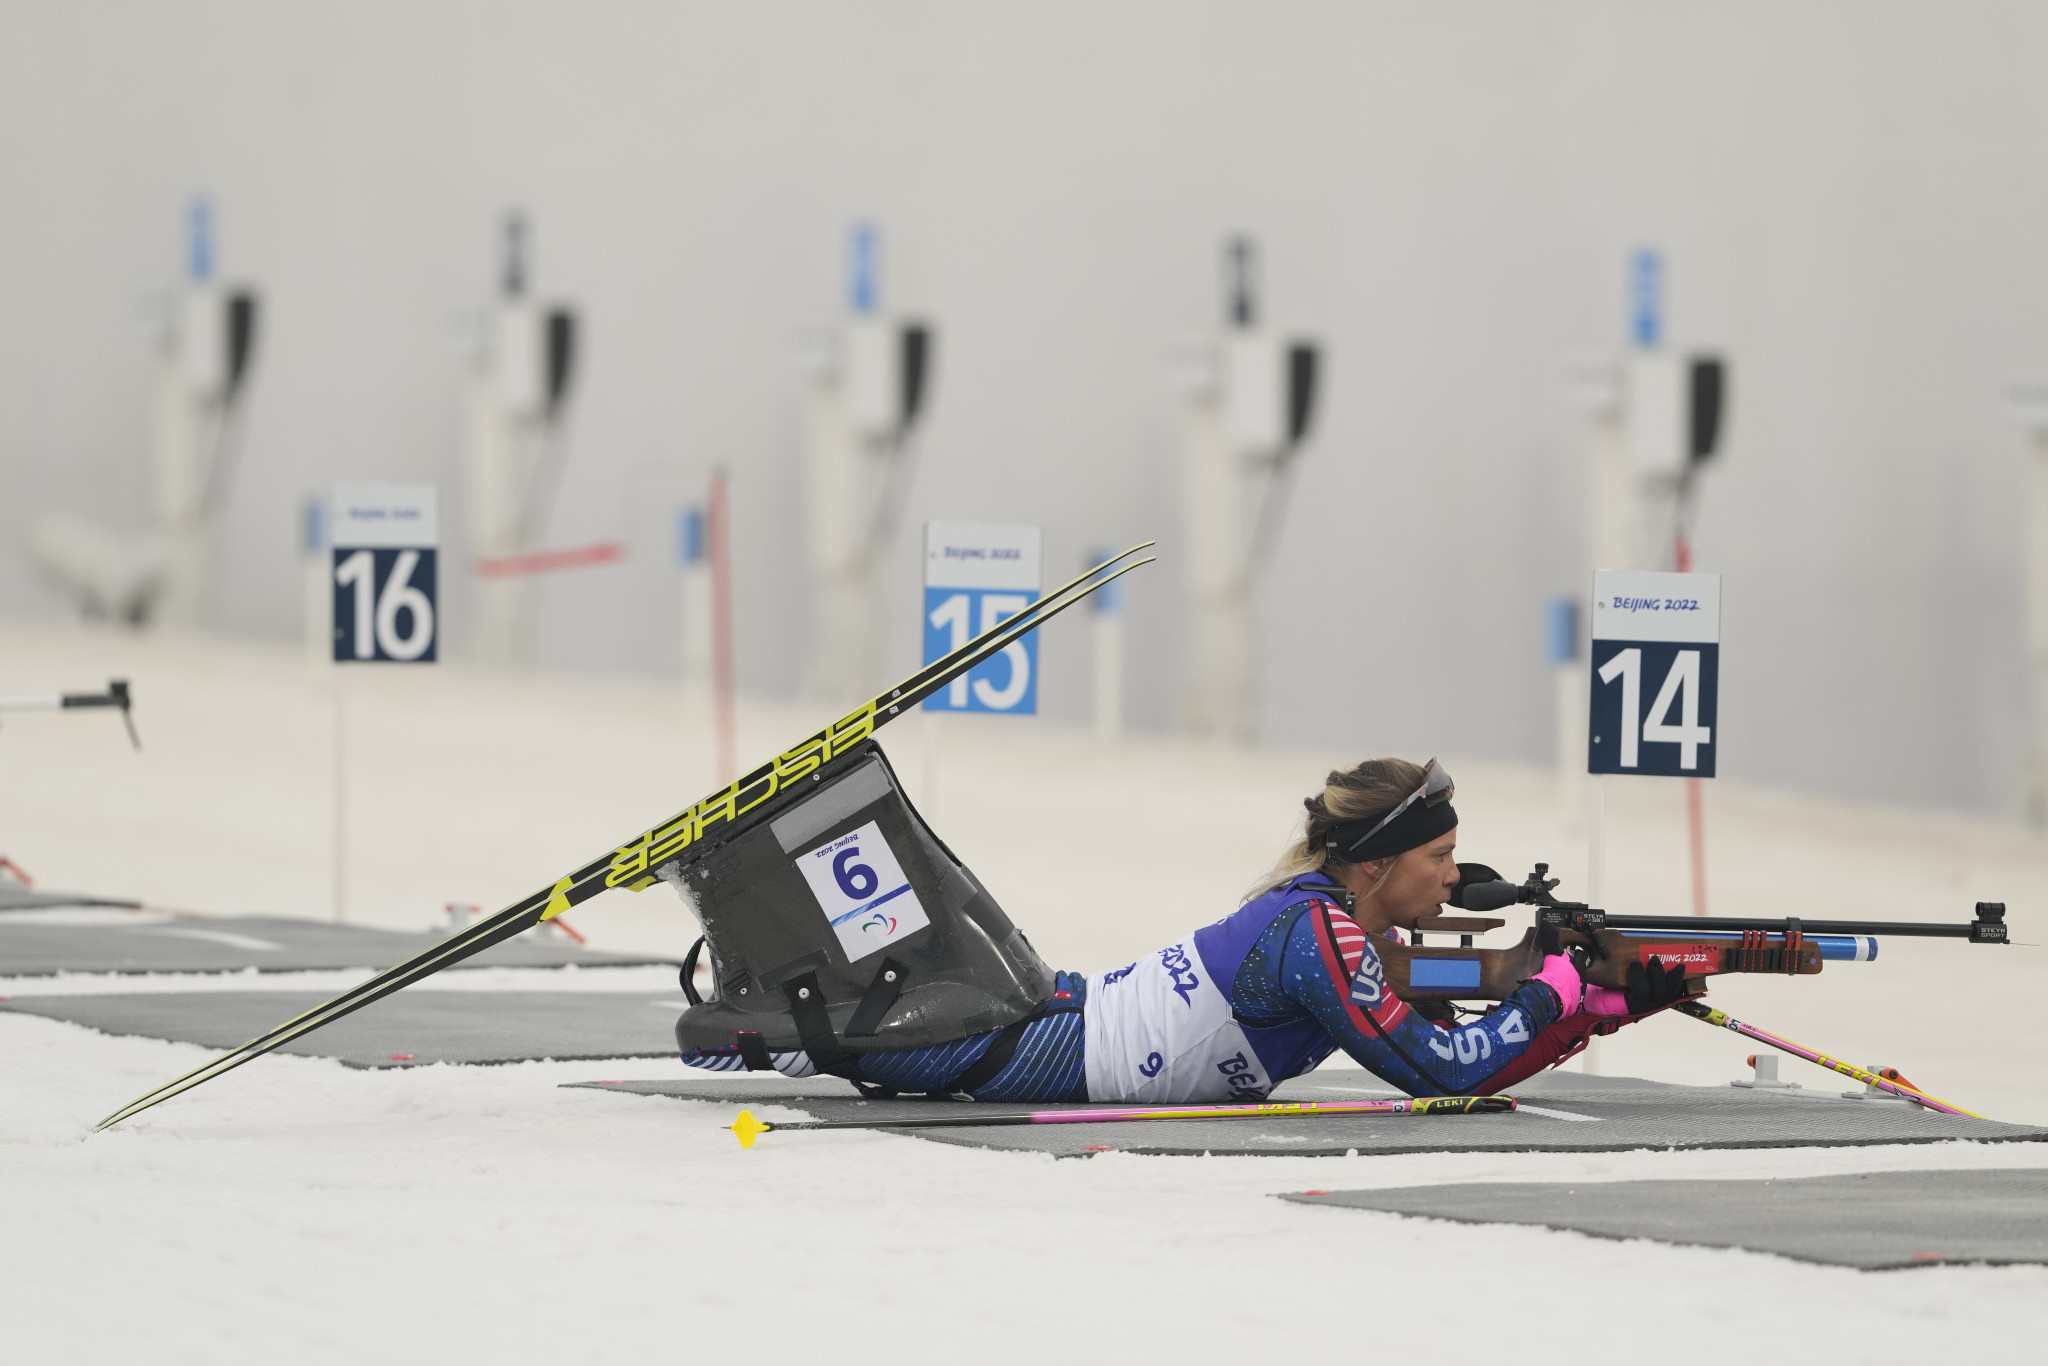 Oksana Masters of the United States won her fifth Beijing 2022 gold medal in the women's individual sitting biathlon event ©Getty Images